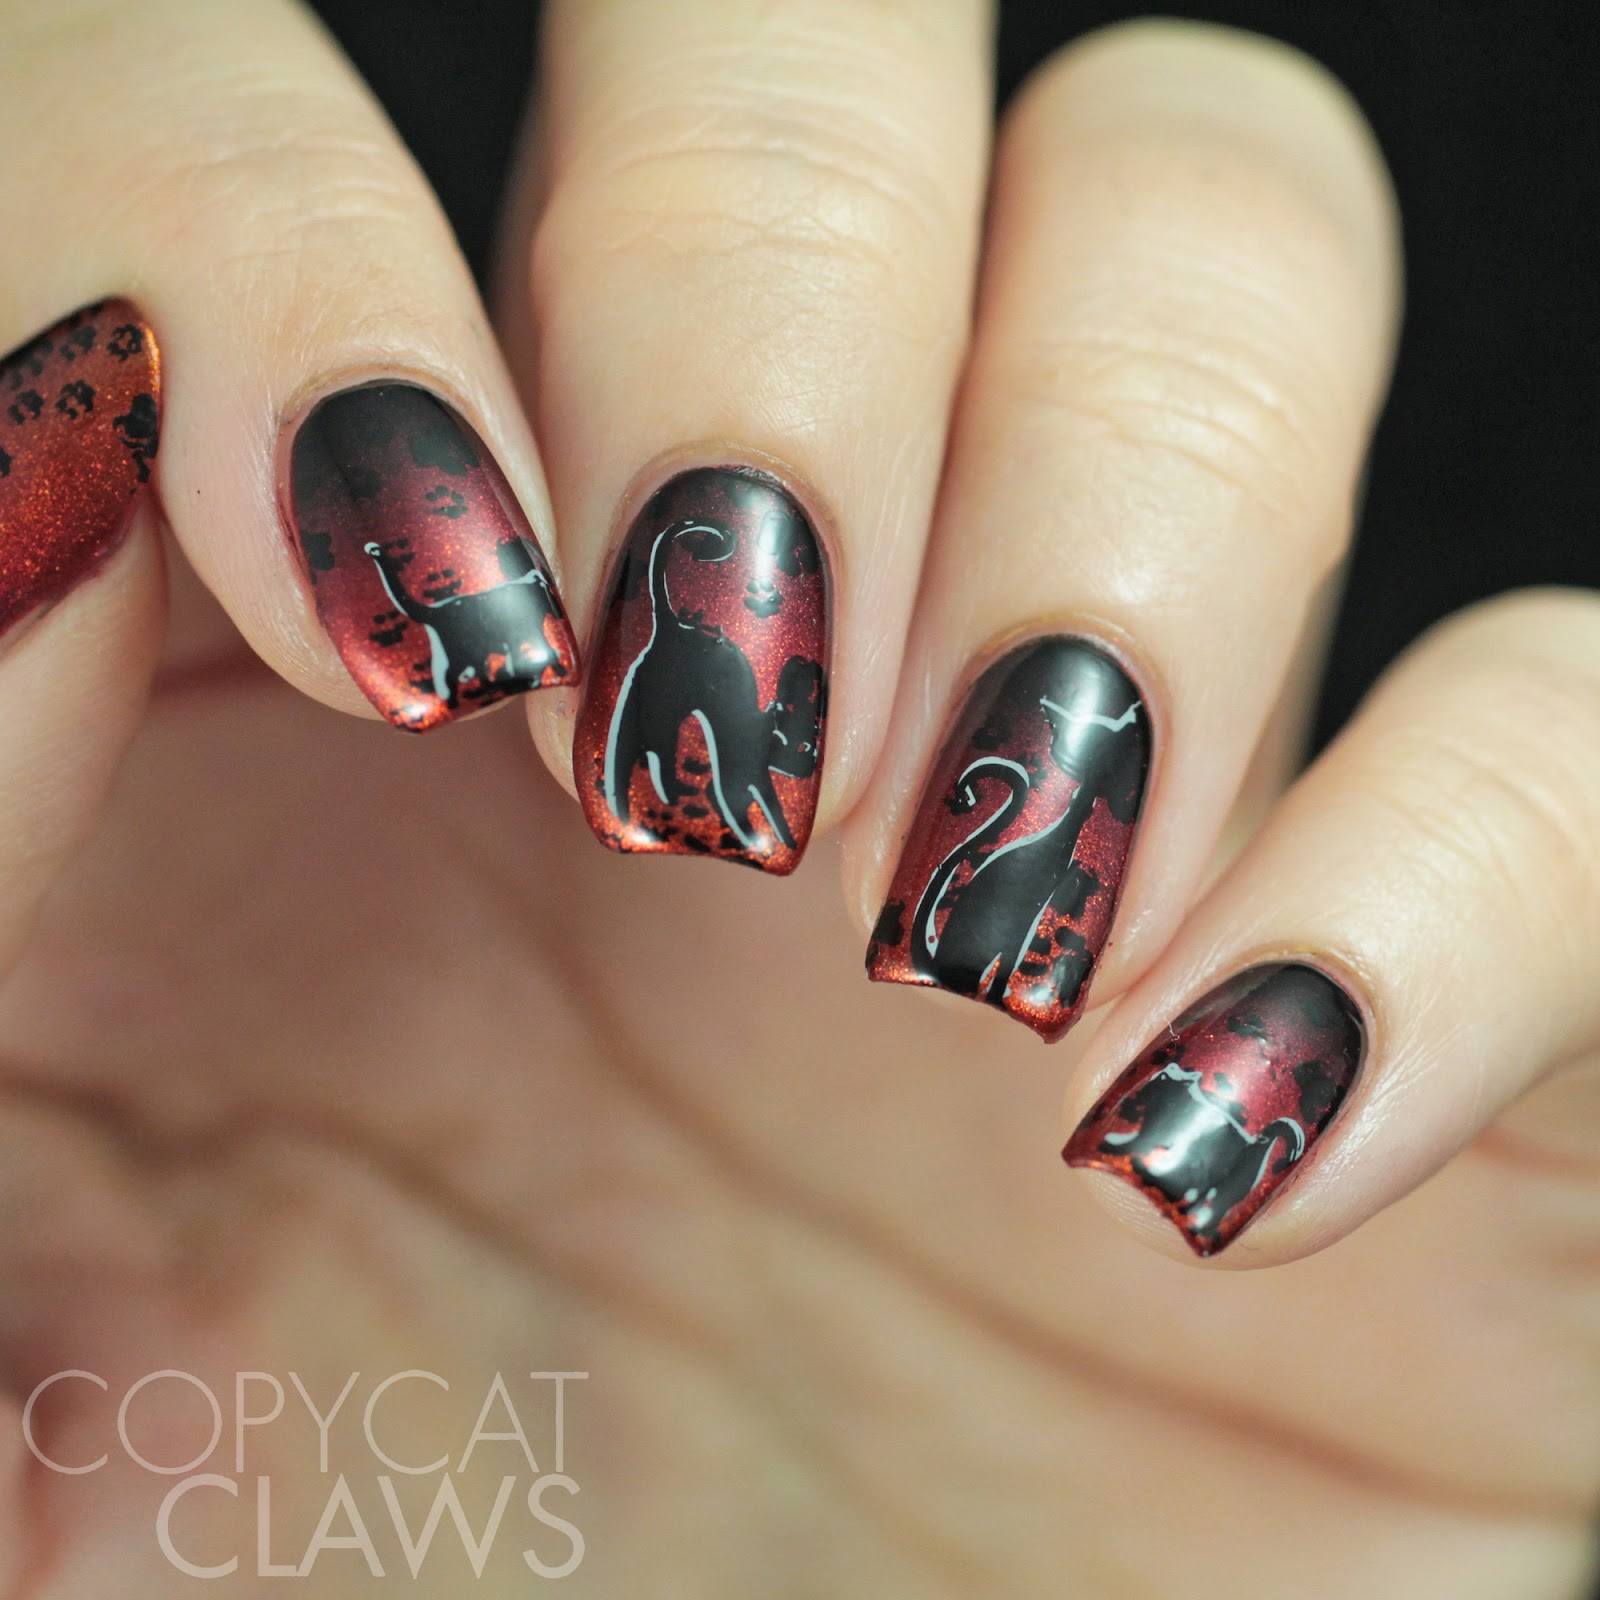 Copycat Claws: 26 Great Nail Art Ideas - Friday The 13th